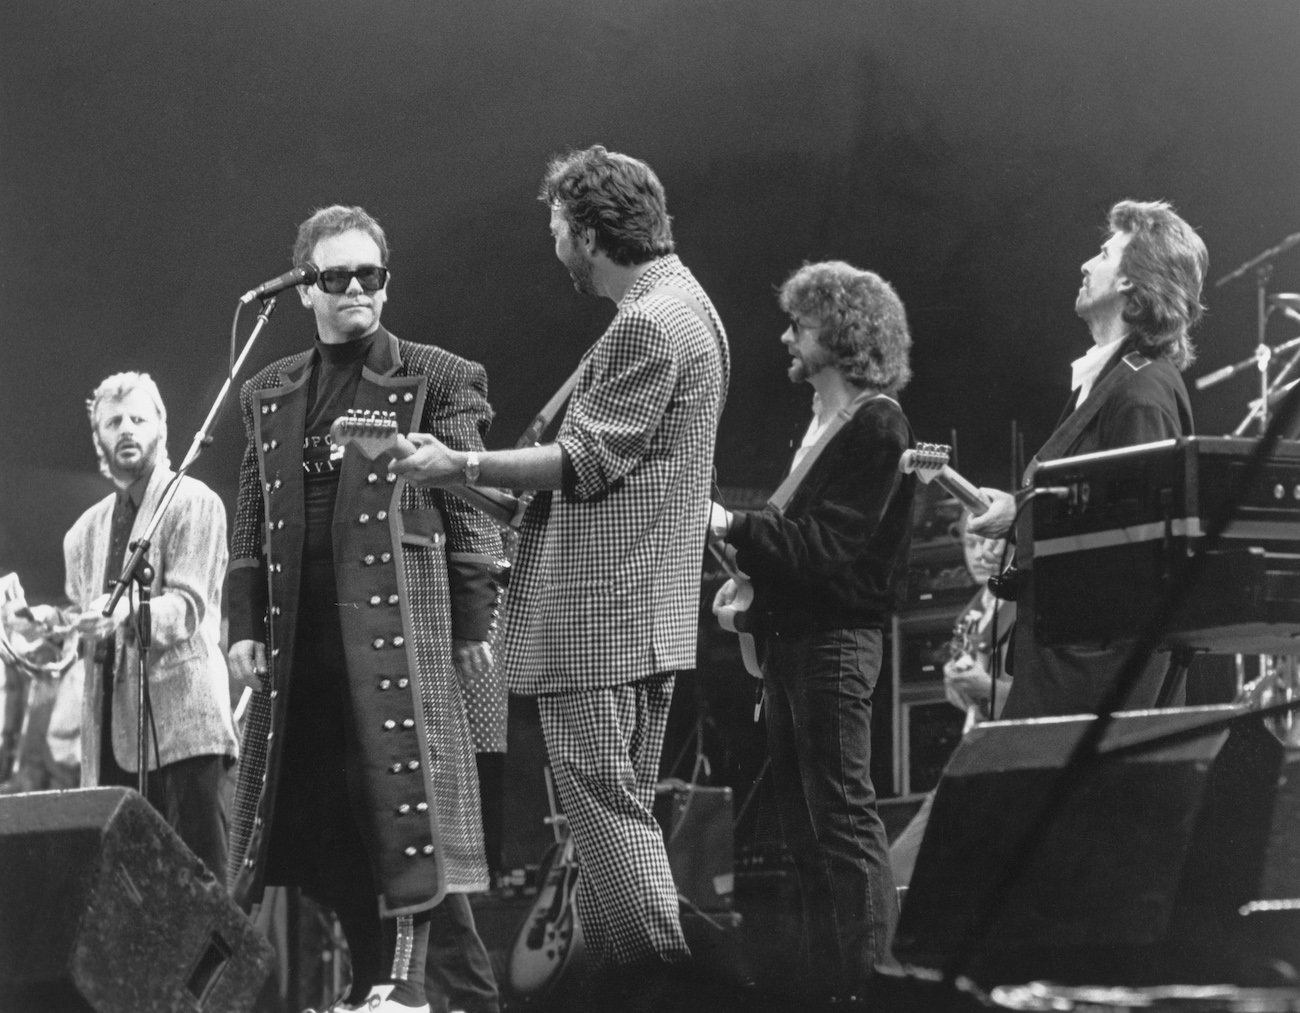 George Harrison performing with Ringo Starr, Elton John, Eric Clapton, and Jeff Lynne at the Prince's Trust Concert in 1987.